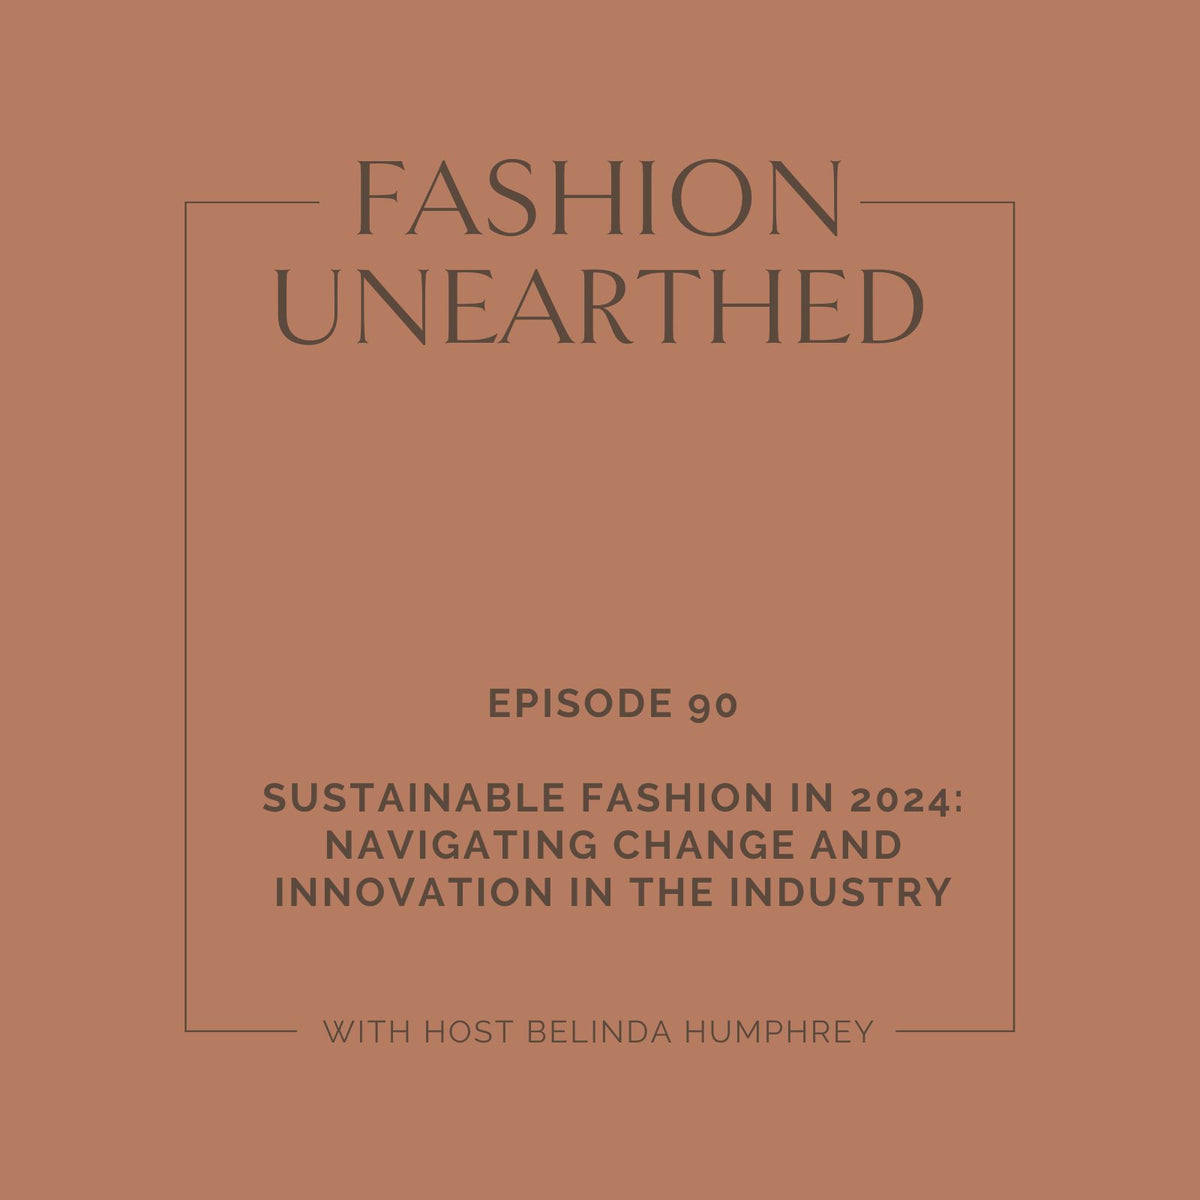 Episode 90: Sustainable Fashion in 2024: Navigating Change and Innovation in the Industry